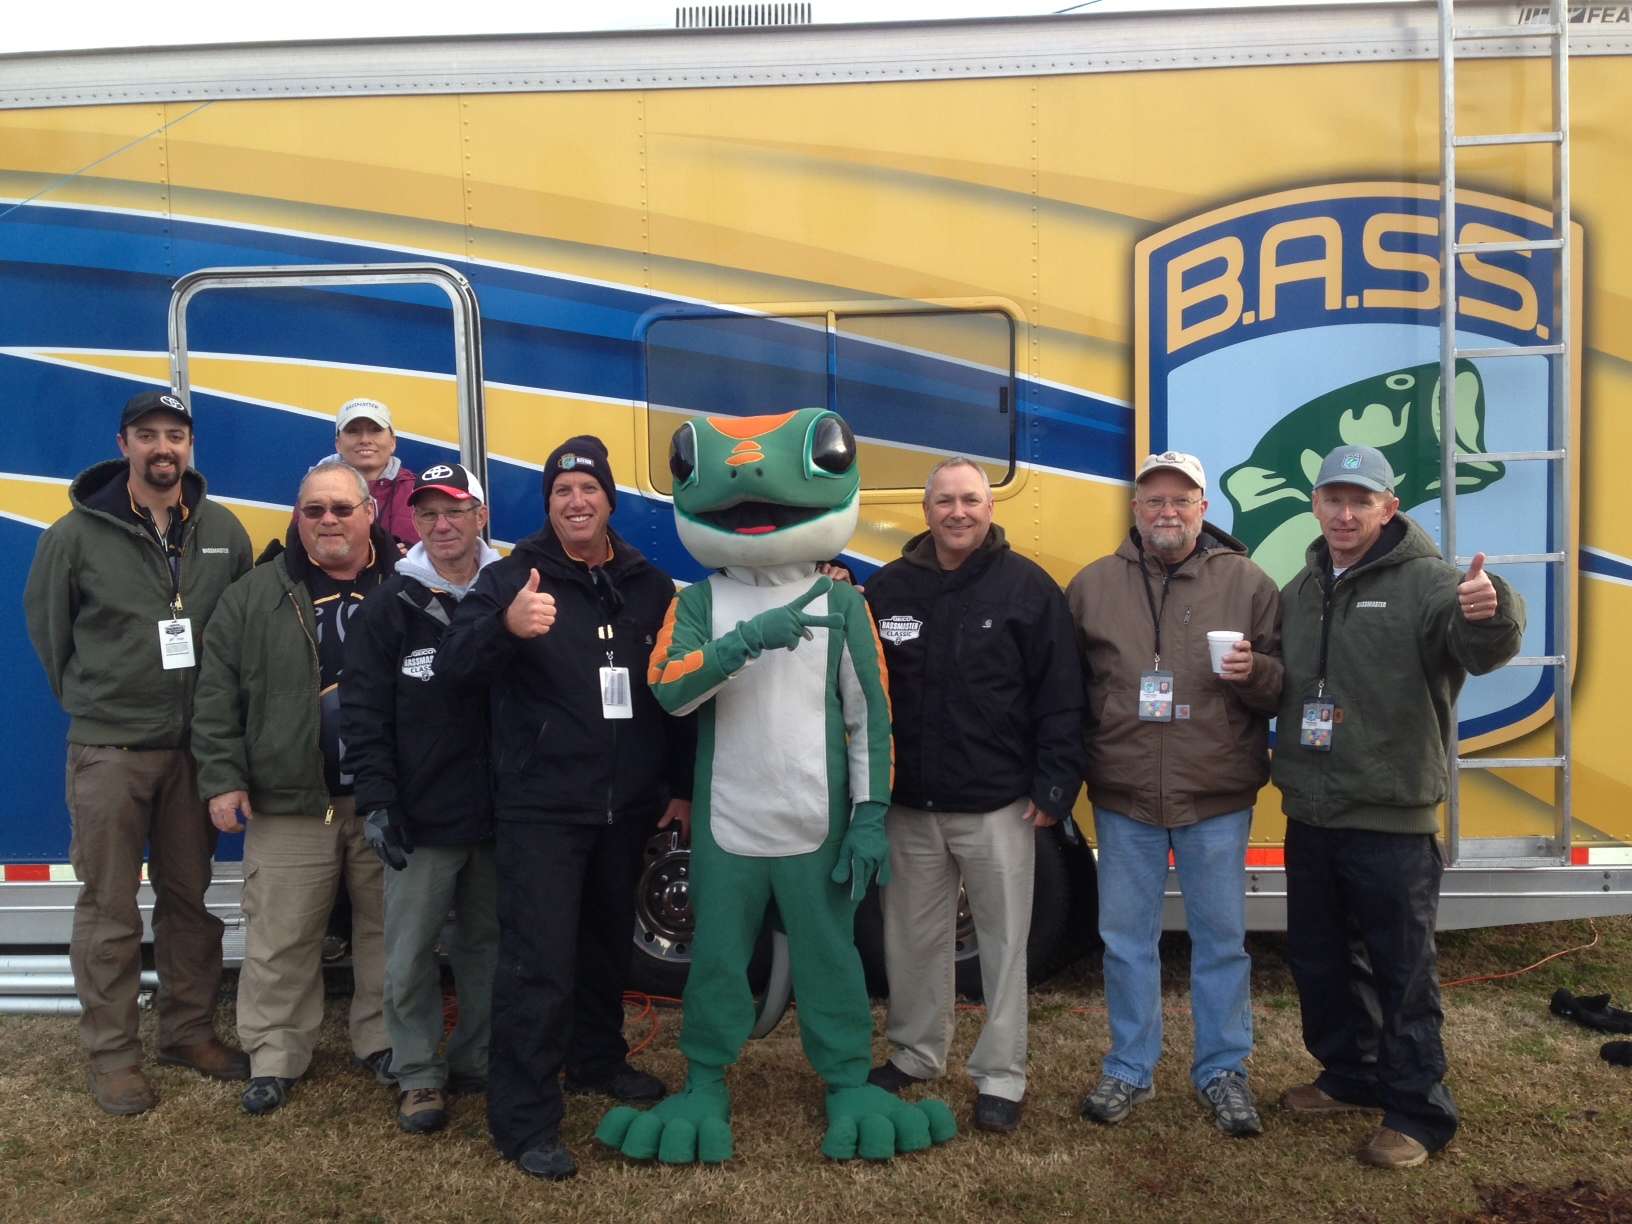 Here is the GEICO Gecko posing with the Bassmaster Tournament team. Thanks to the Gecko for making the Classic truly memorable. 